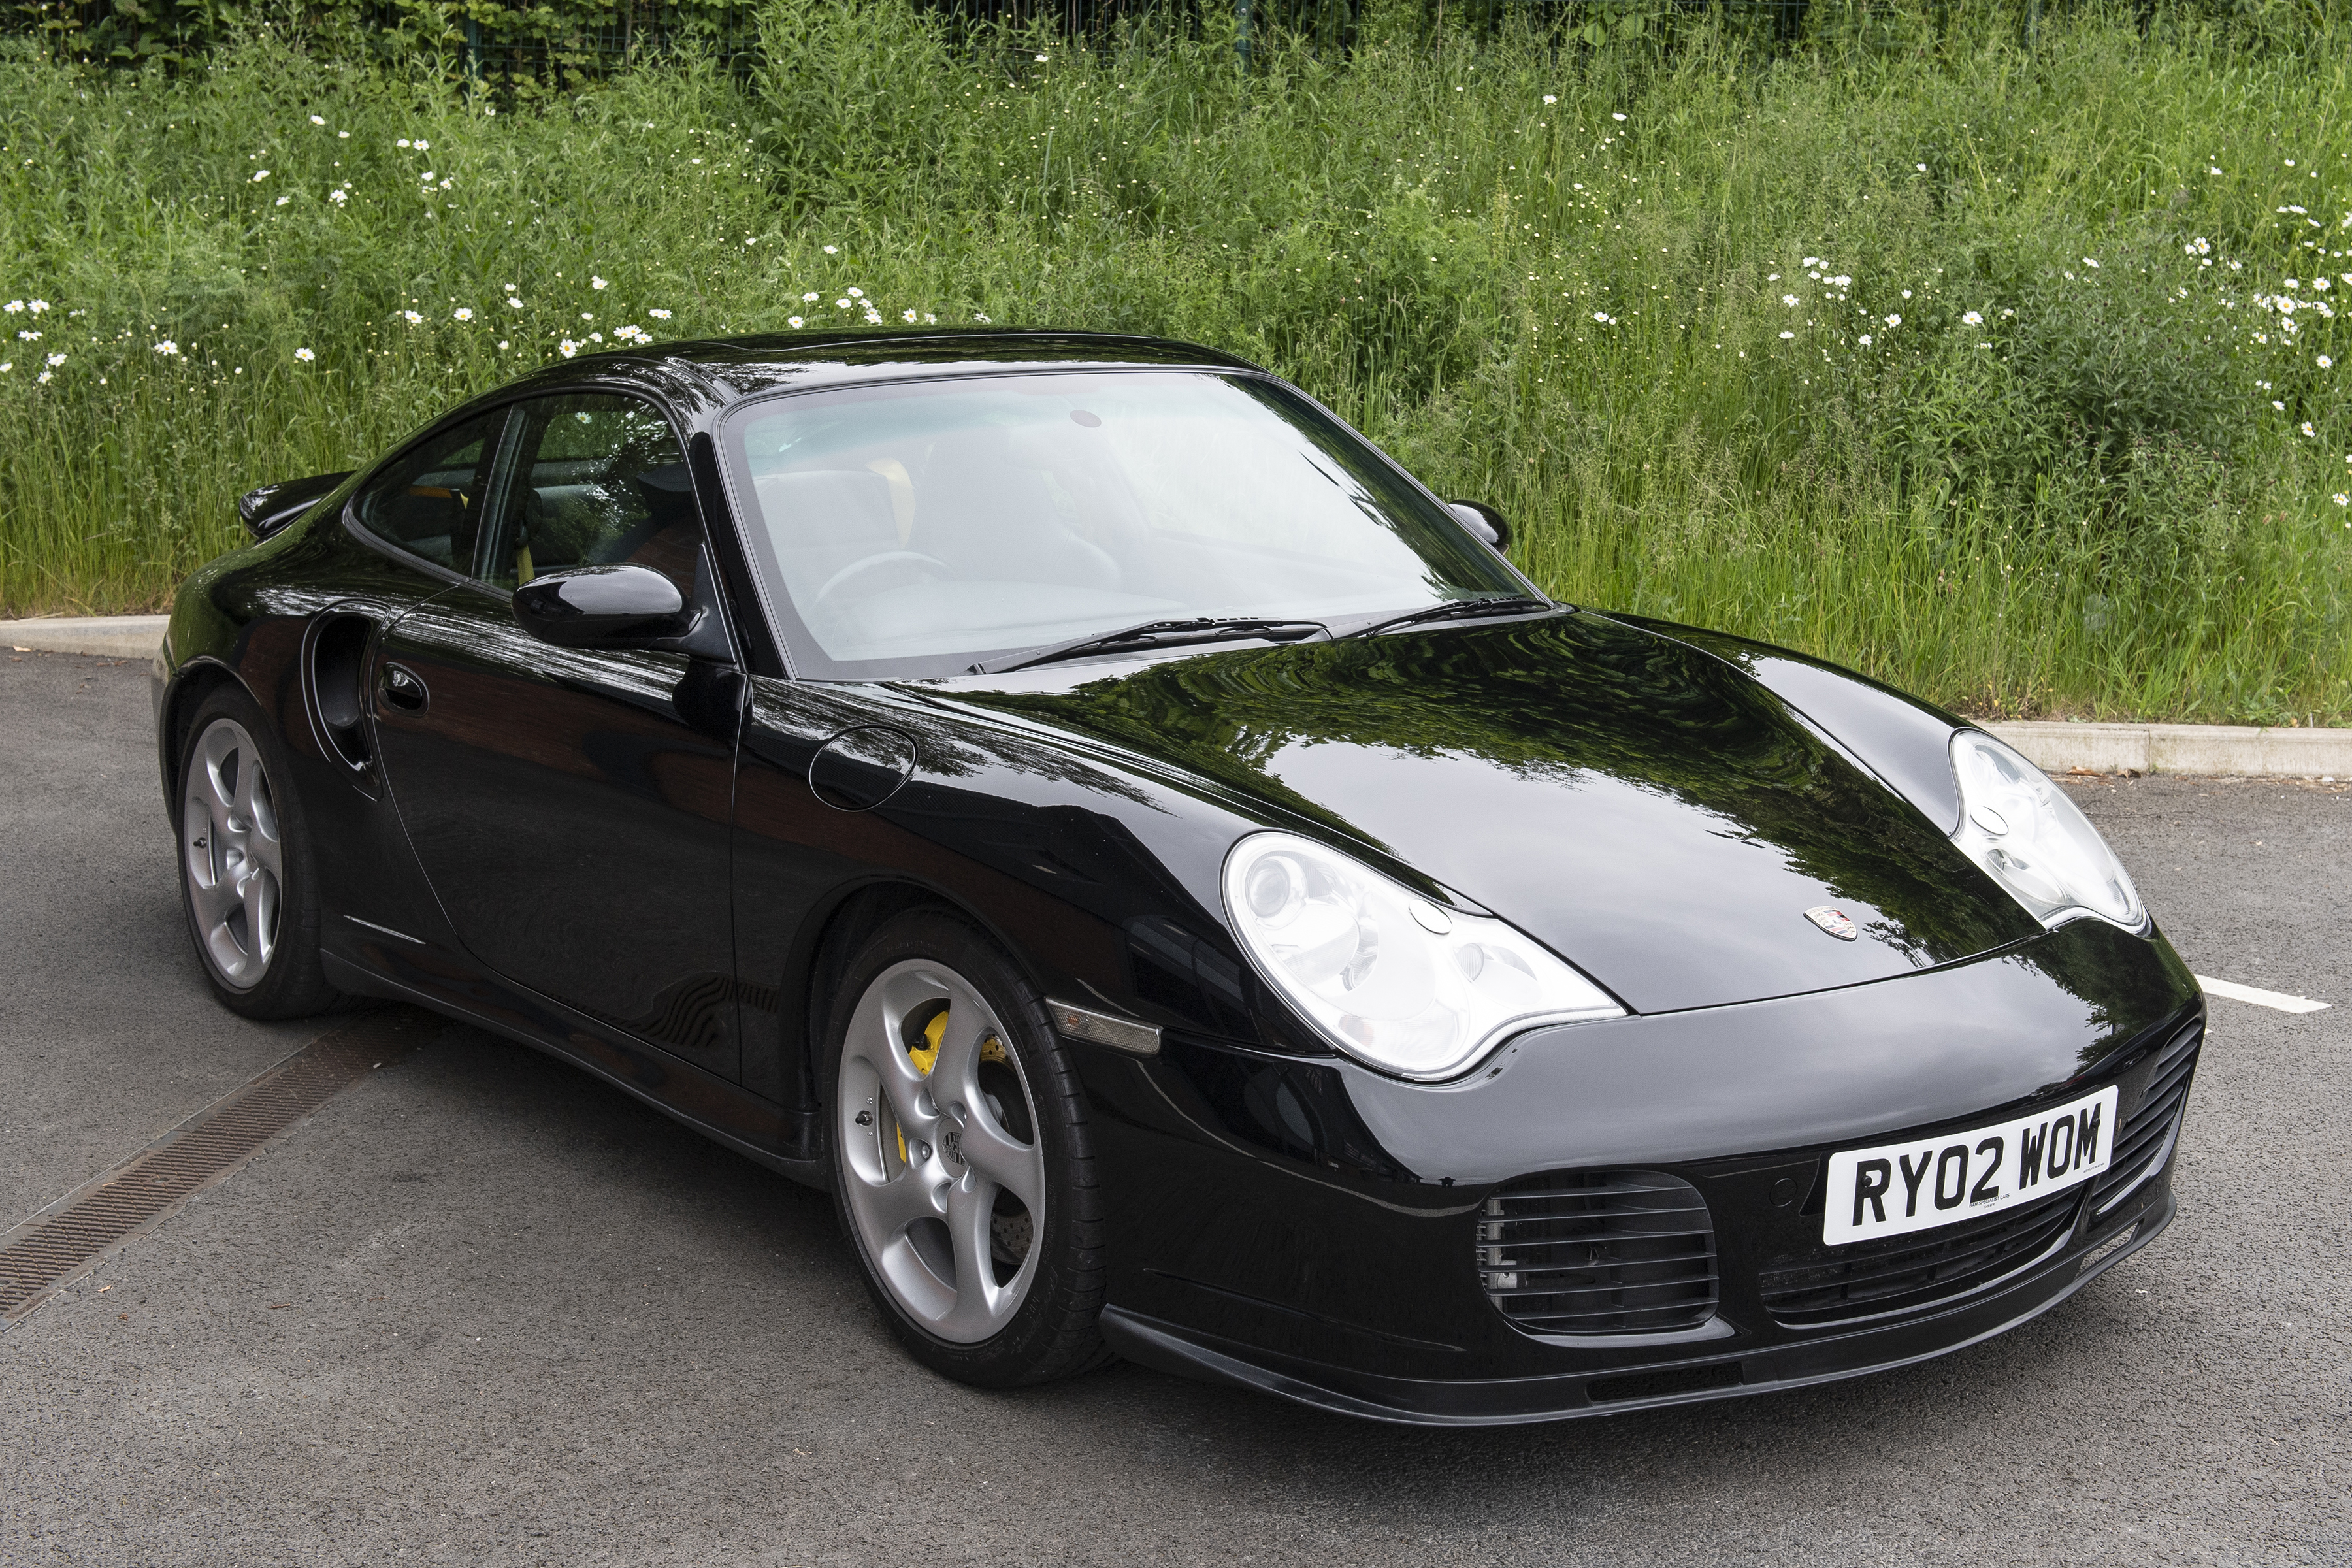 2002 PORSCHE 911 (996) TURBO for sale by auction in Chesterfield, Derbyshire, United Kingdom pic